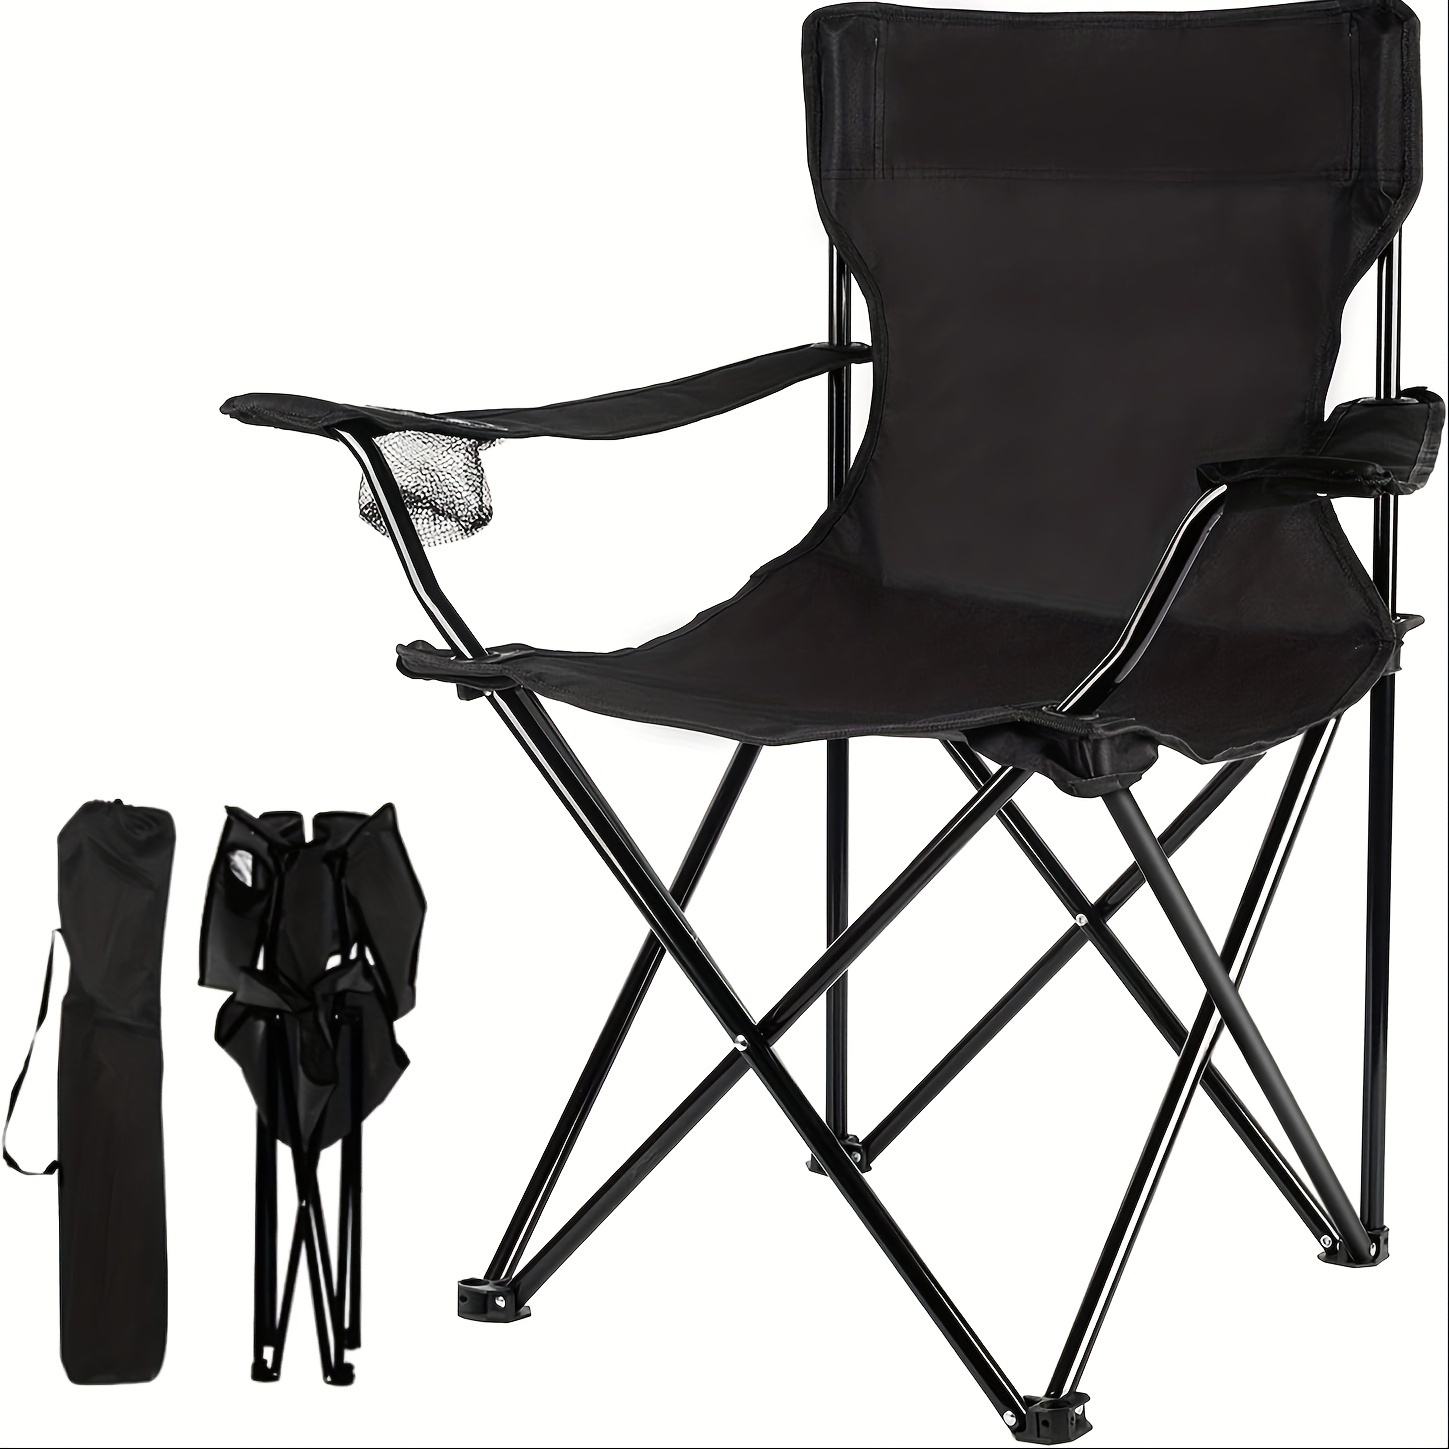 1pc portable camping chair versatile folding chair sports chair for outdoor lawn beach with carrying bag sports & outdoors